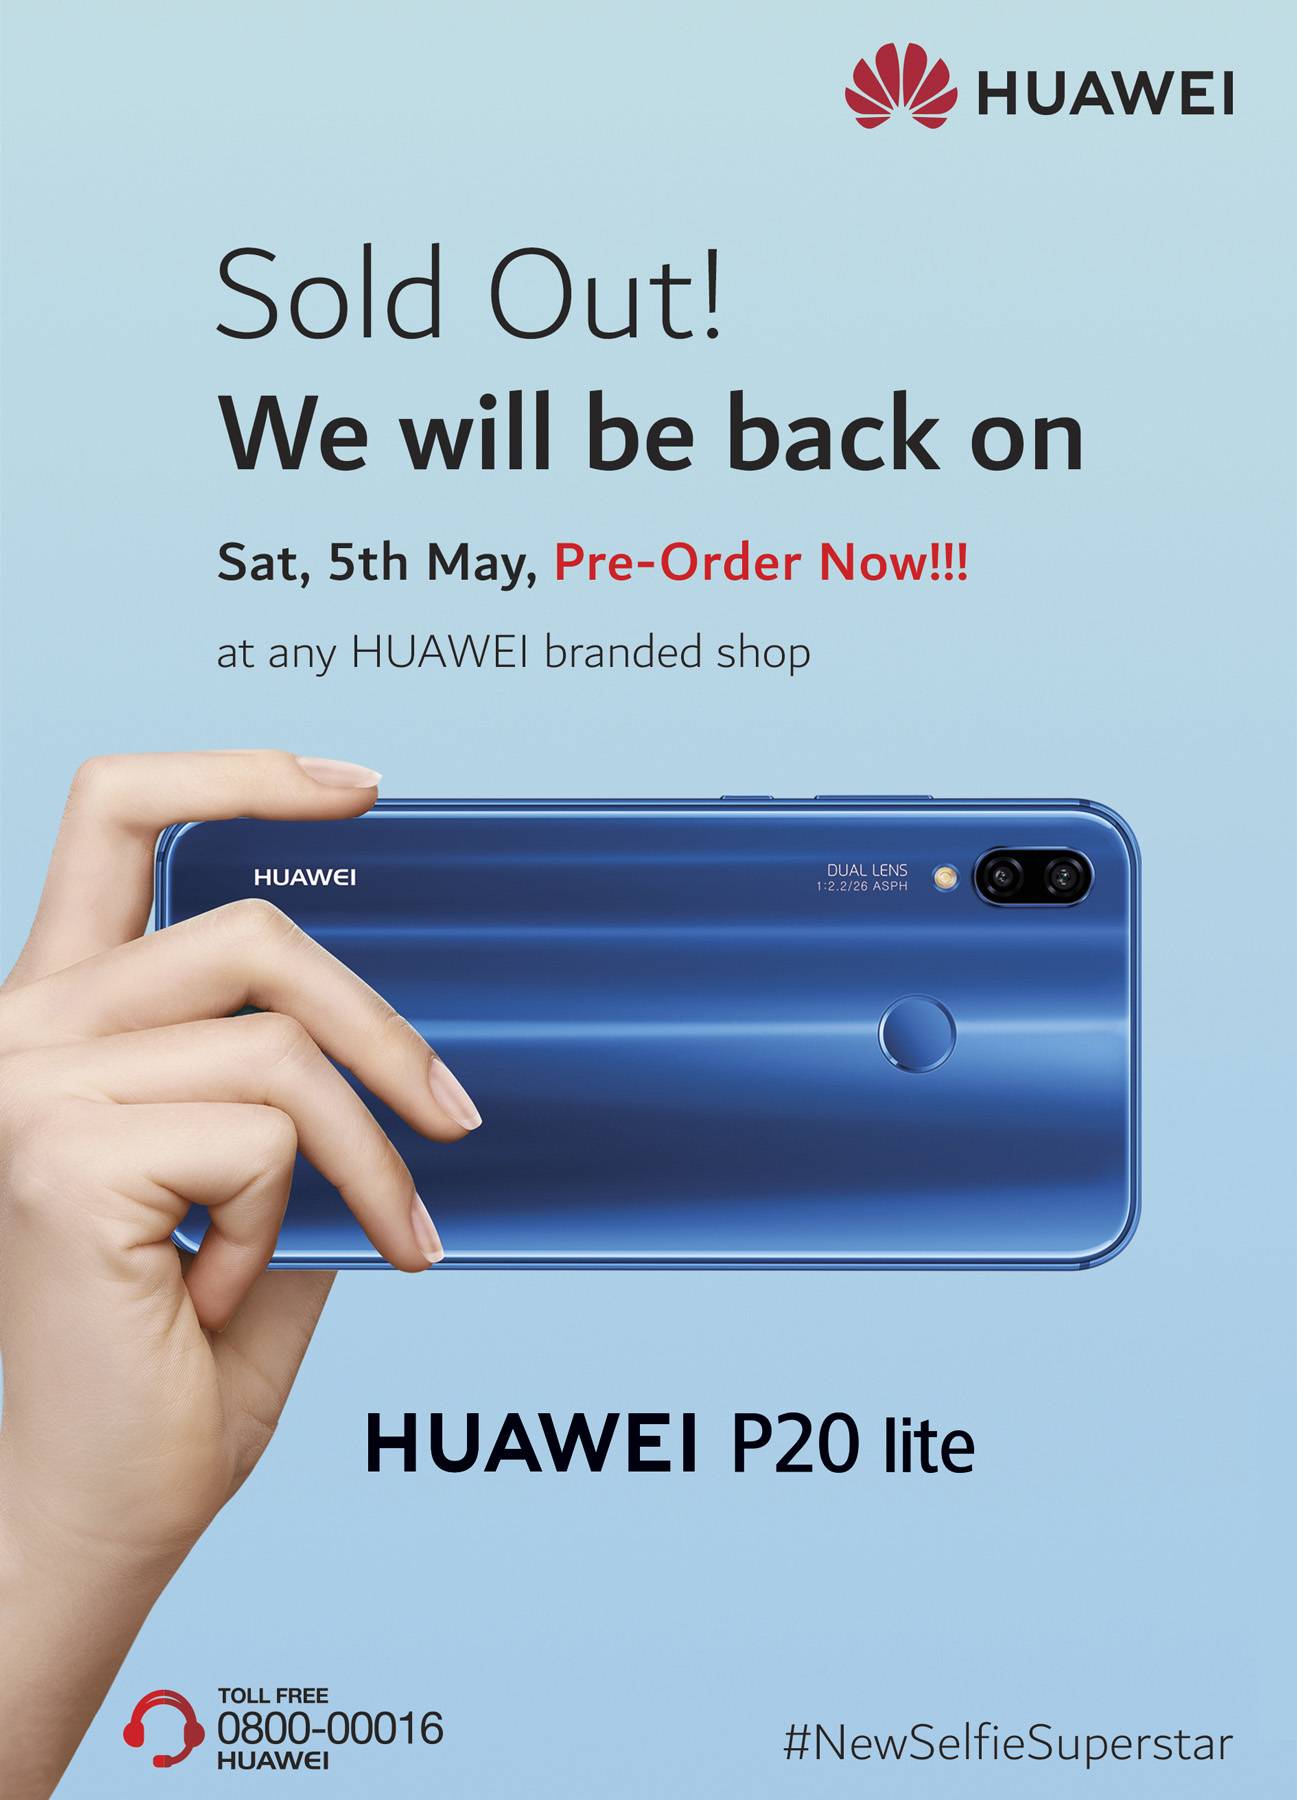 More than 300% Increase in Sales of the HUAWEI P20 Series